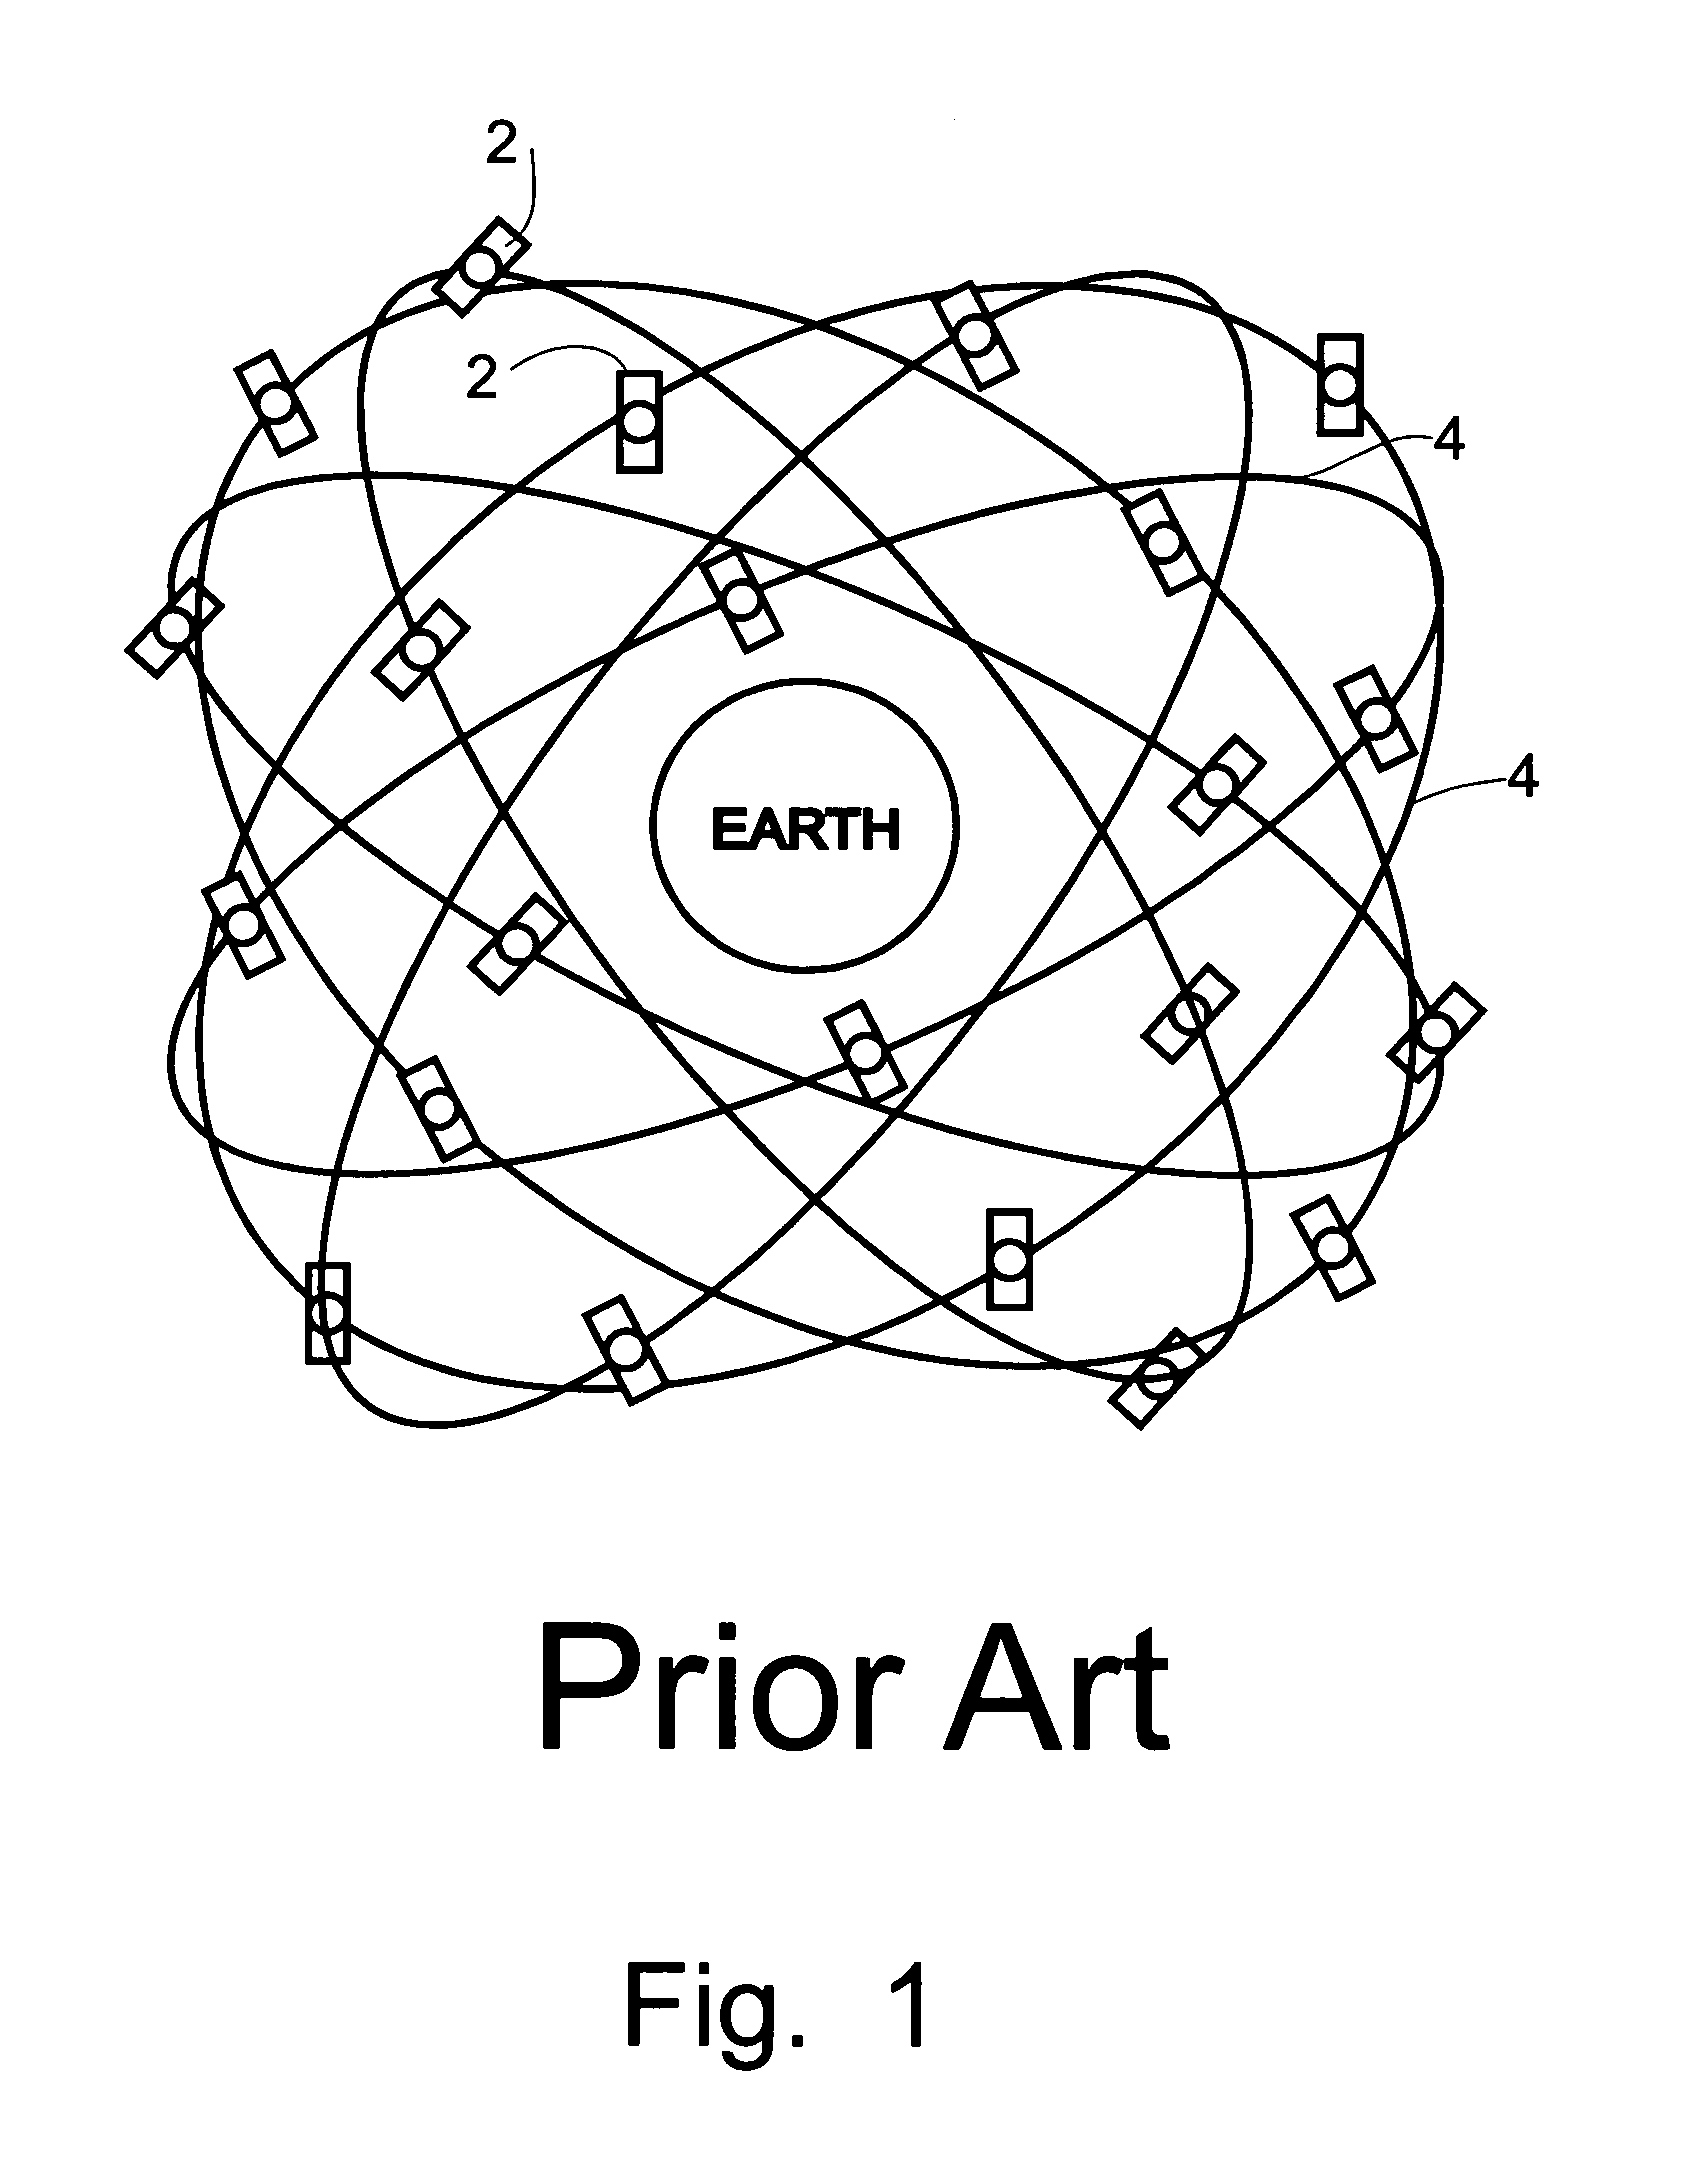 Method and system for detecting objects external to a vehicle